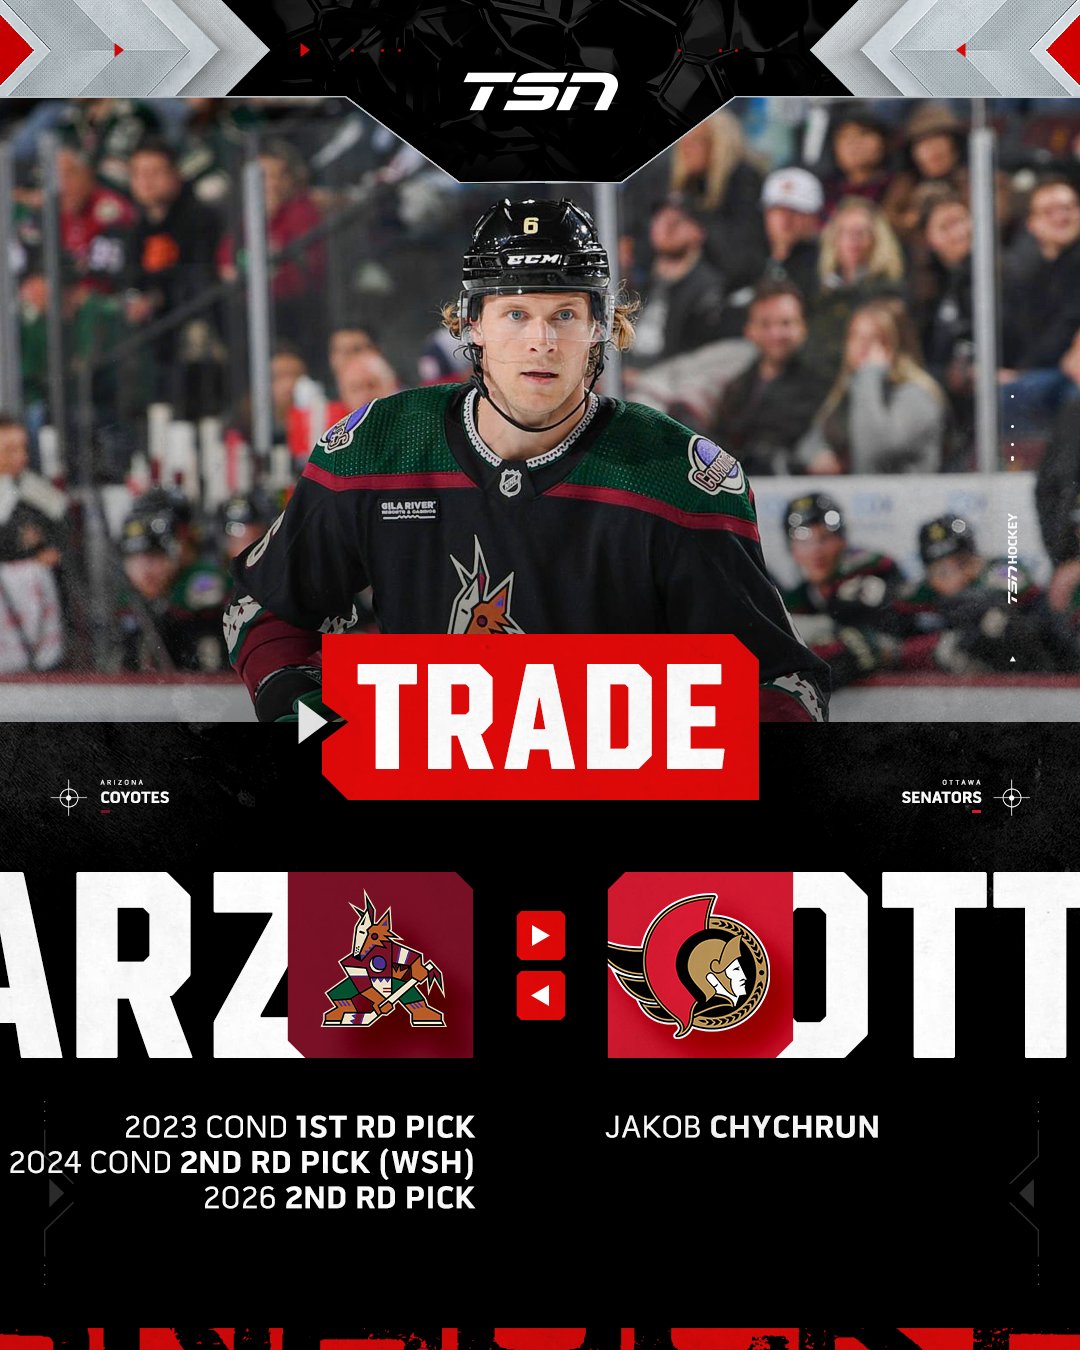 TSN on Twitter: "The Ottawa Senators have acquired Jakob Chychrun in a deal  with the Arizona Coyotes. MORE: https://t.co/CPew3TogYm  https://t.co/F620dBFEOB" / Twitter